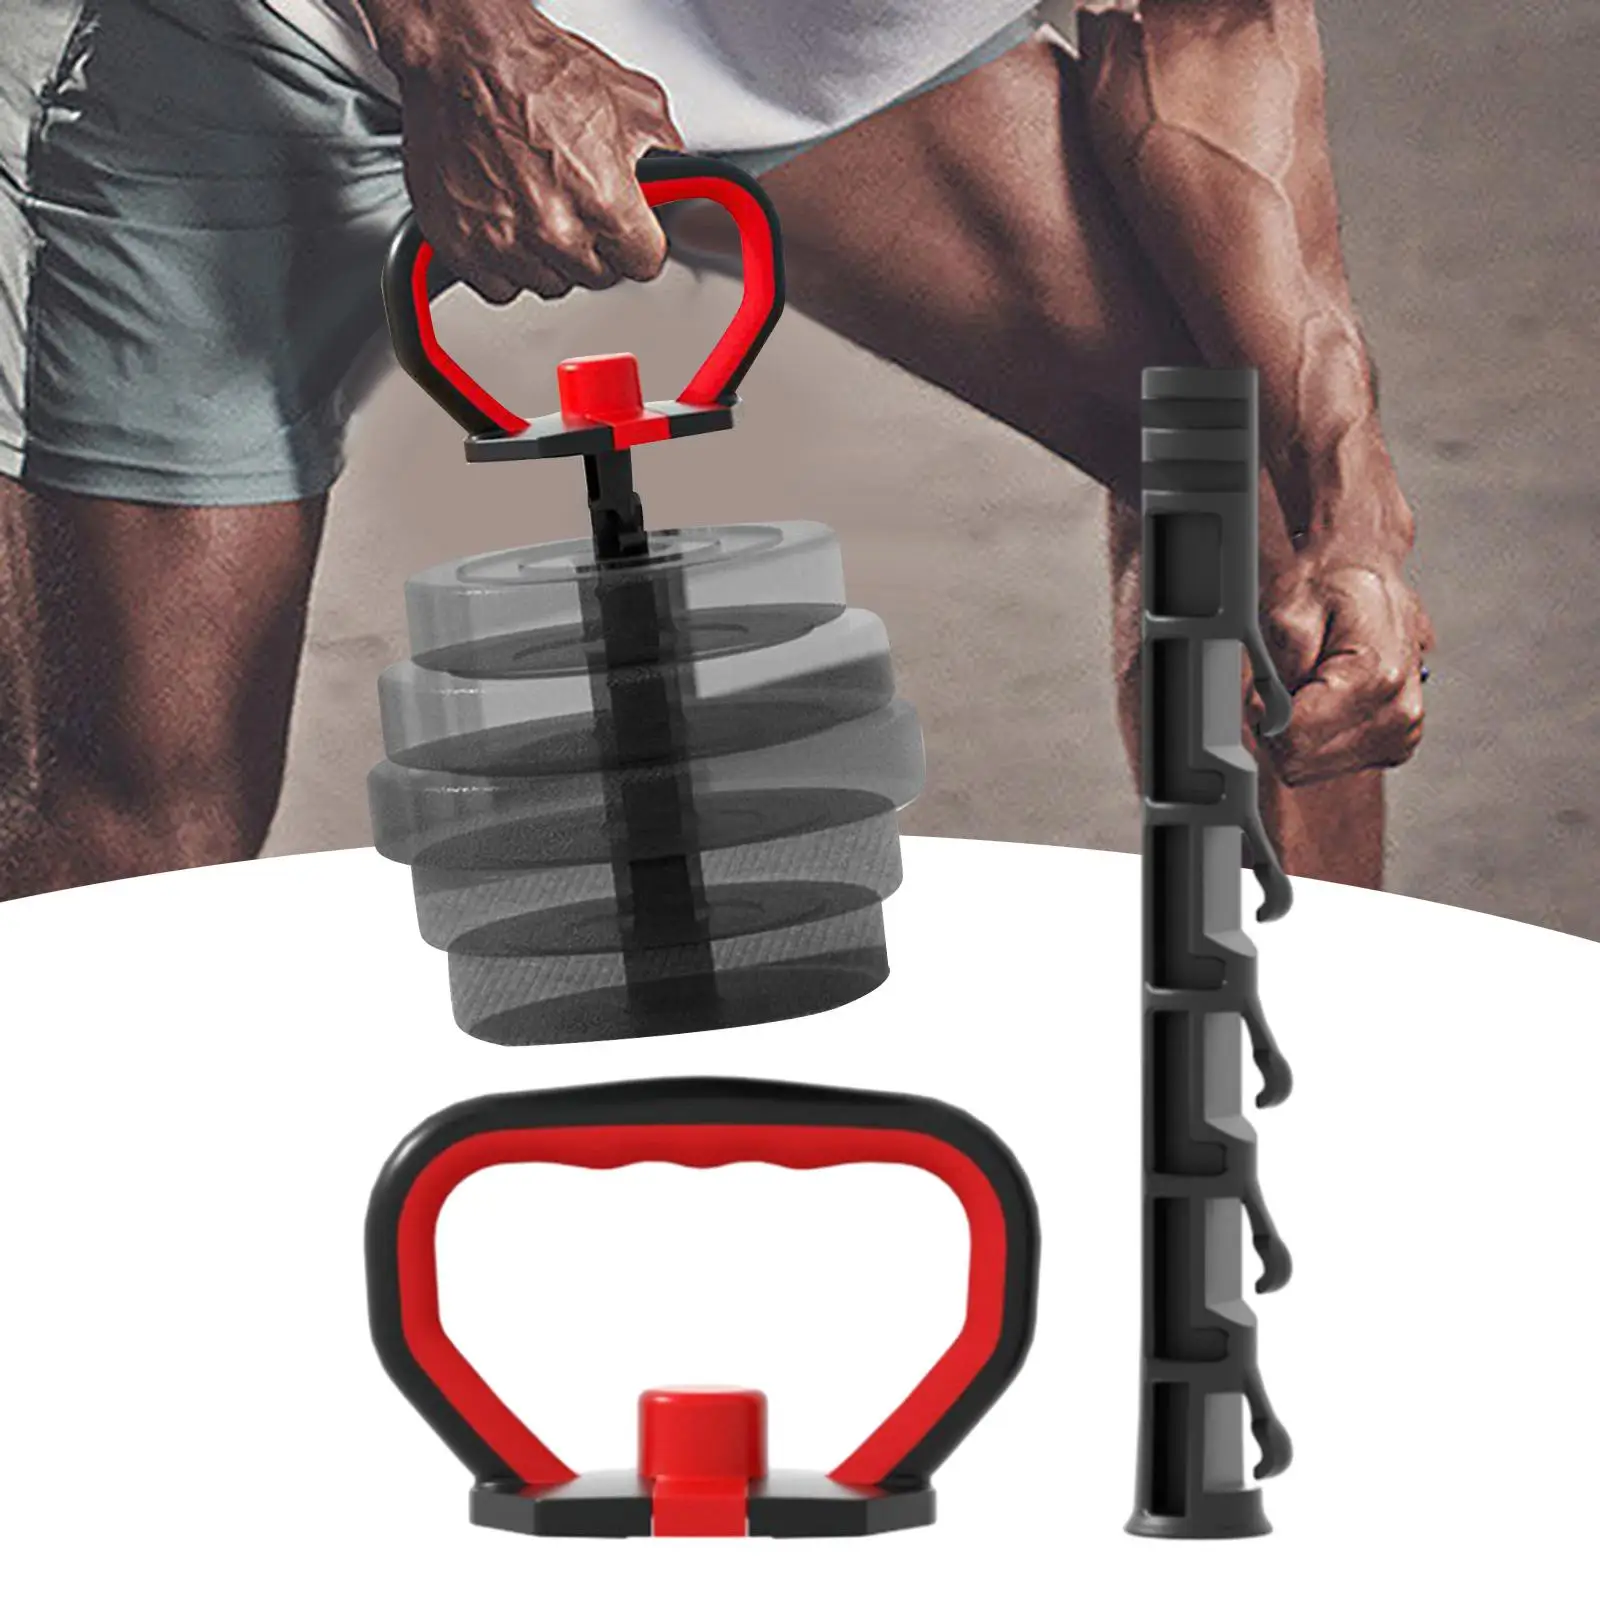 Adjustable Kettlebell Handle Grip Handle Dumbbell Push up for Plates Strength Training Anti Slip with Base Kettlebell Grip